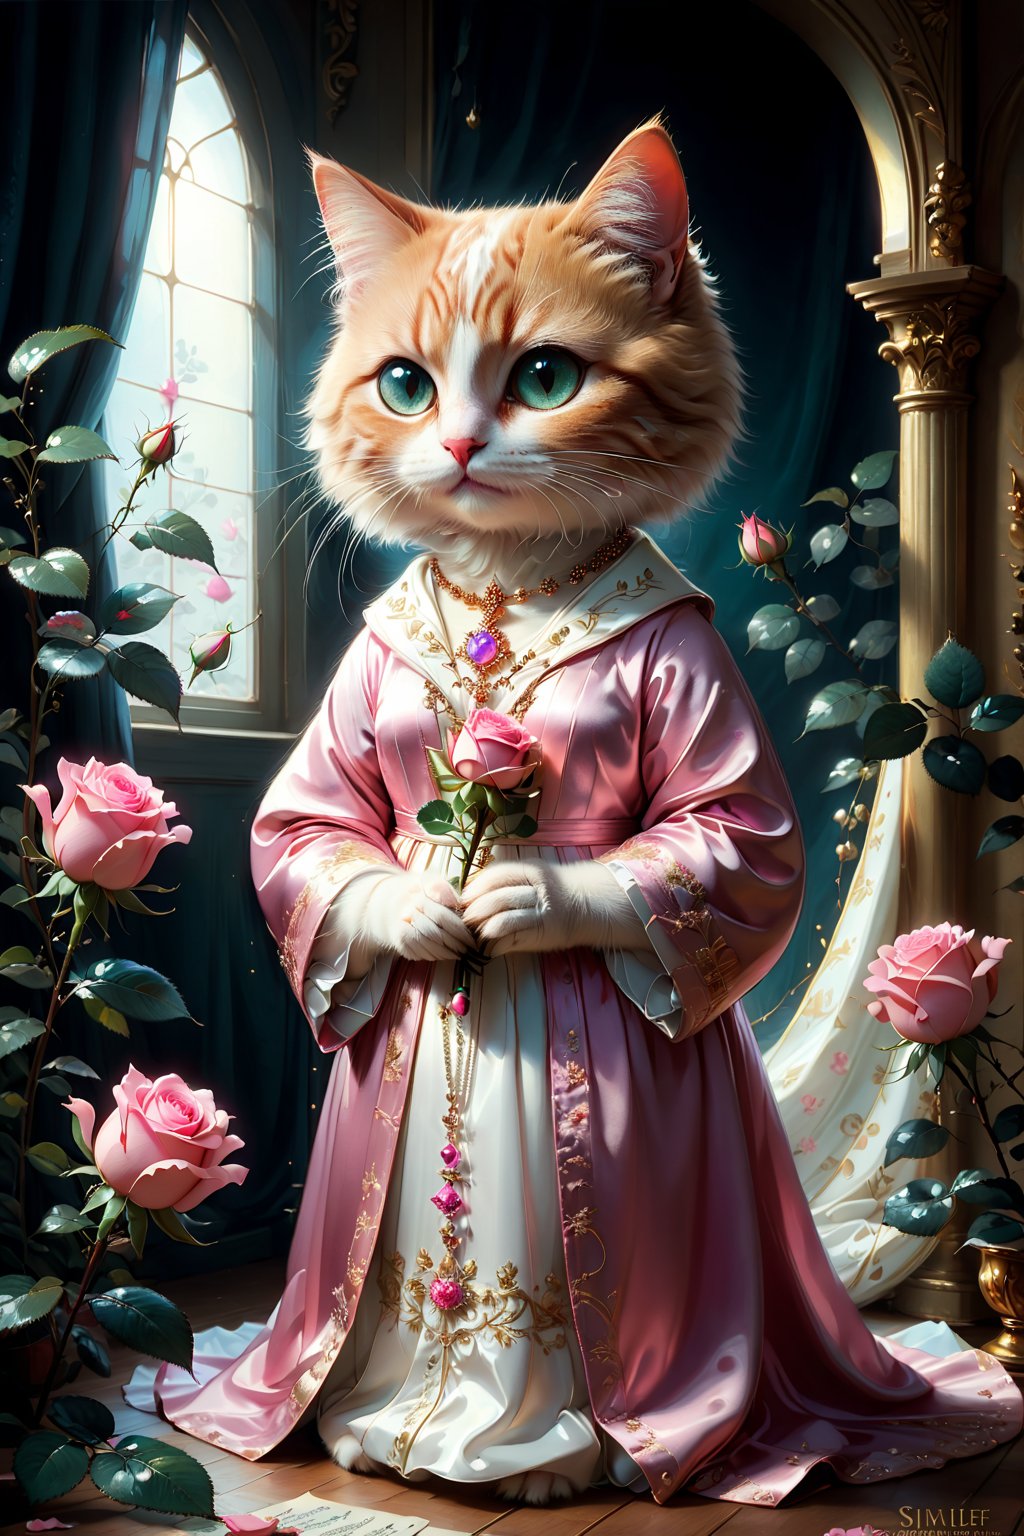 royal cat holding pink rose,clad in opulent robe,moonshine necklace,Little love around,floral sheet music background
Oil painting inspired by the style of Silke Leffler, Lisbeth Zwerger, Rebecca Dautremer, and  sandro nardini,
sharp focus, emotive brushstrokes,
strong chiaroscuro for heightened contrast between light and shadows,
creating a tangible sense of depth and perspective, realistic drawings,More Details, stworki